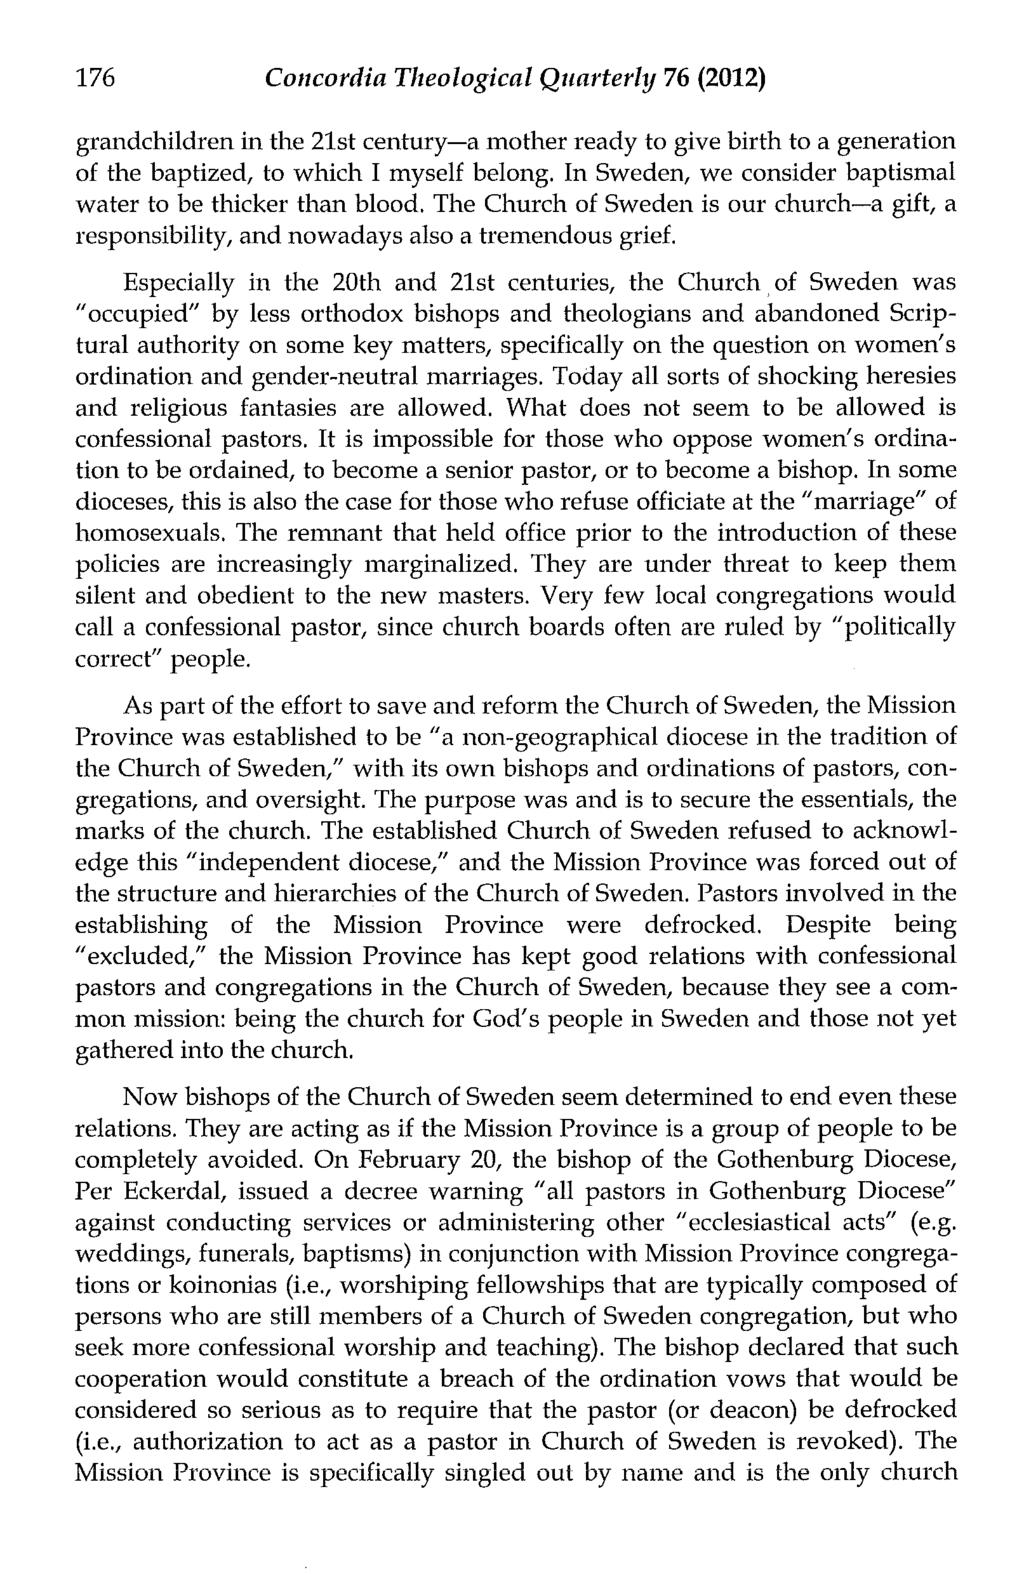 176 Concordia Theological Quarterly 76 (2012) grandchildren in the 21st century-a mother ready to give birth to a generation of the baptized, to which I myself belong.